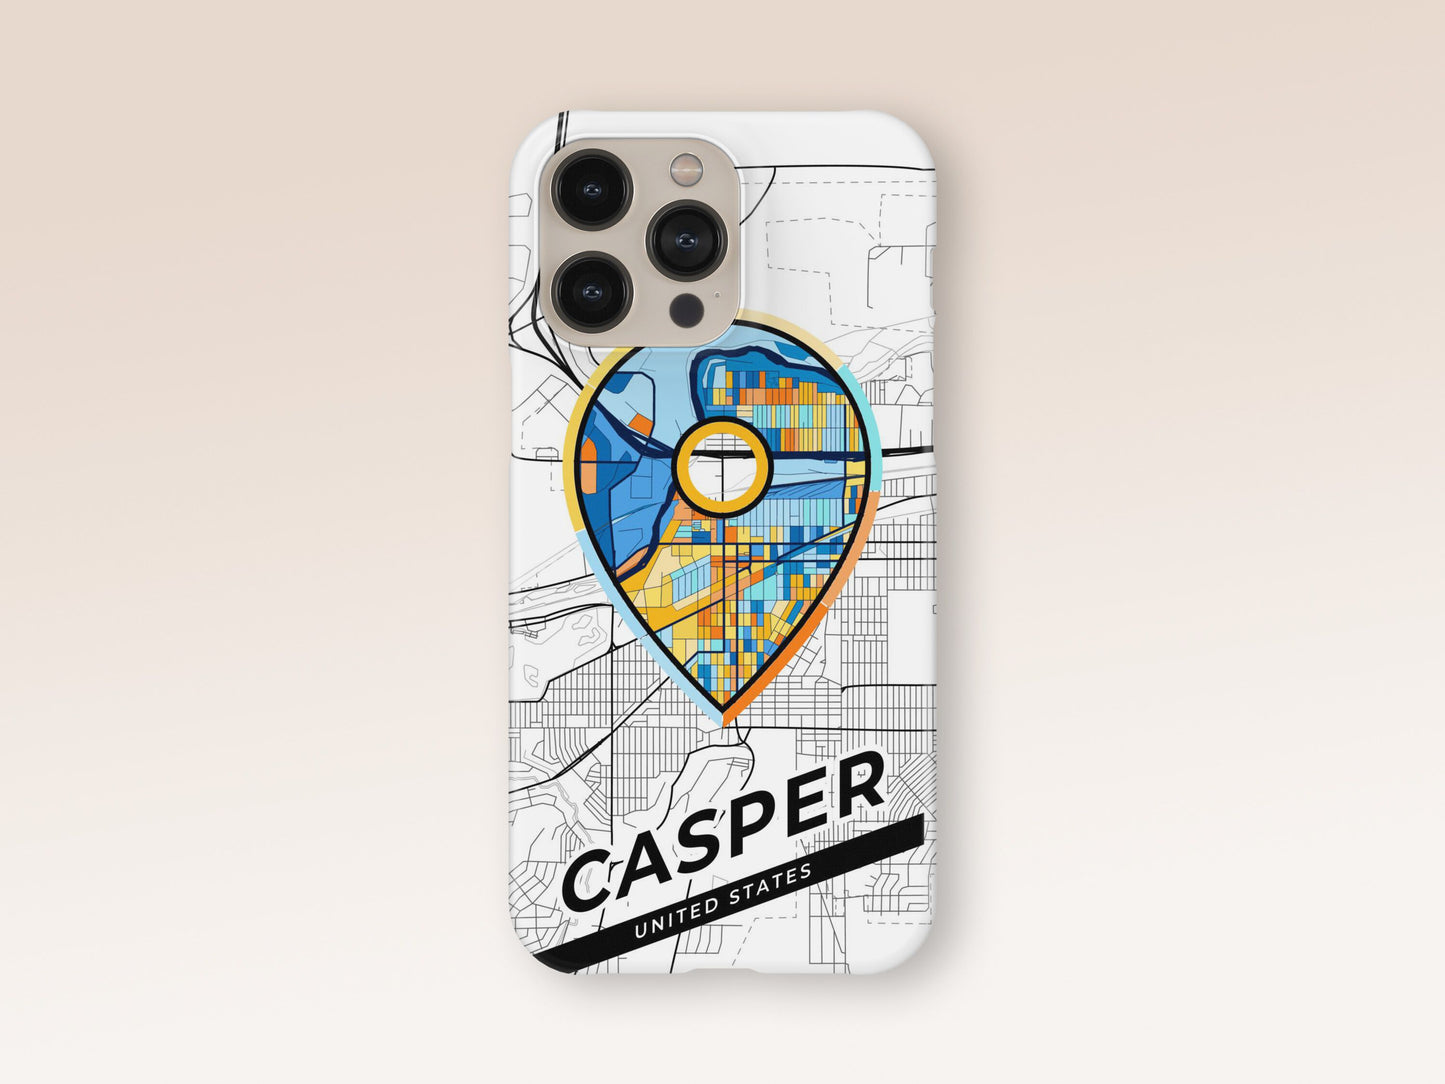 Casper Wyoming slim phone case with colorful icon. Birthday, wedding or housewarming gift. Couple match cases. 1